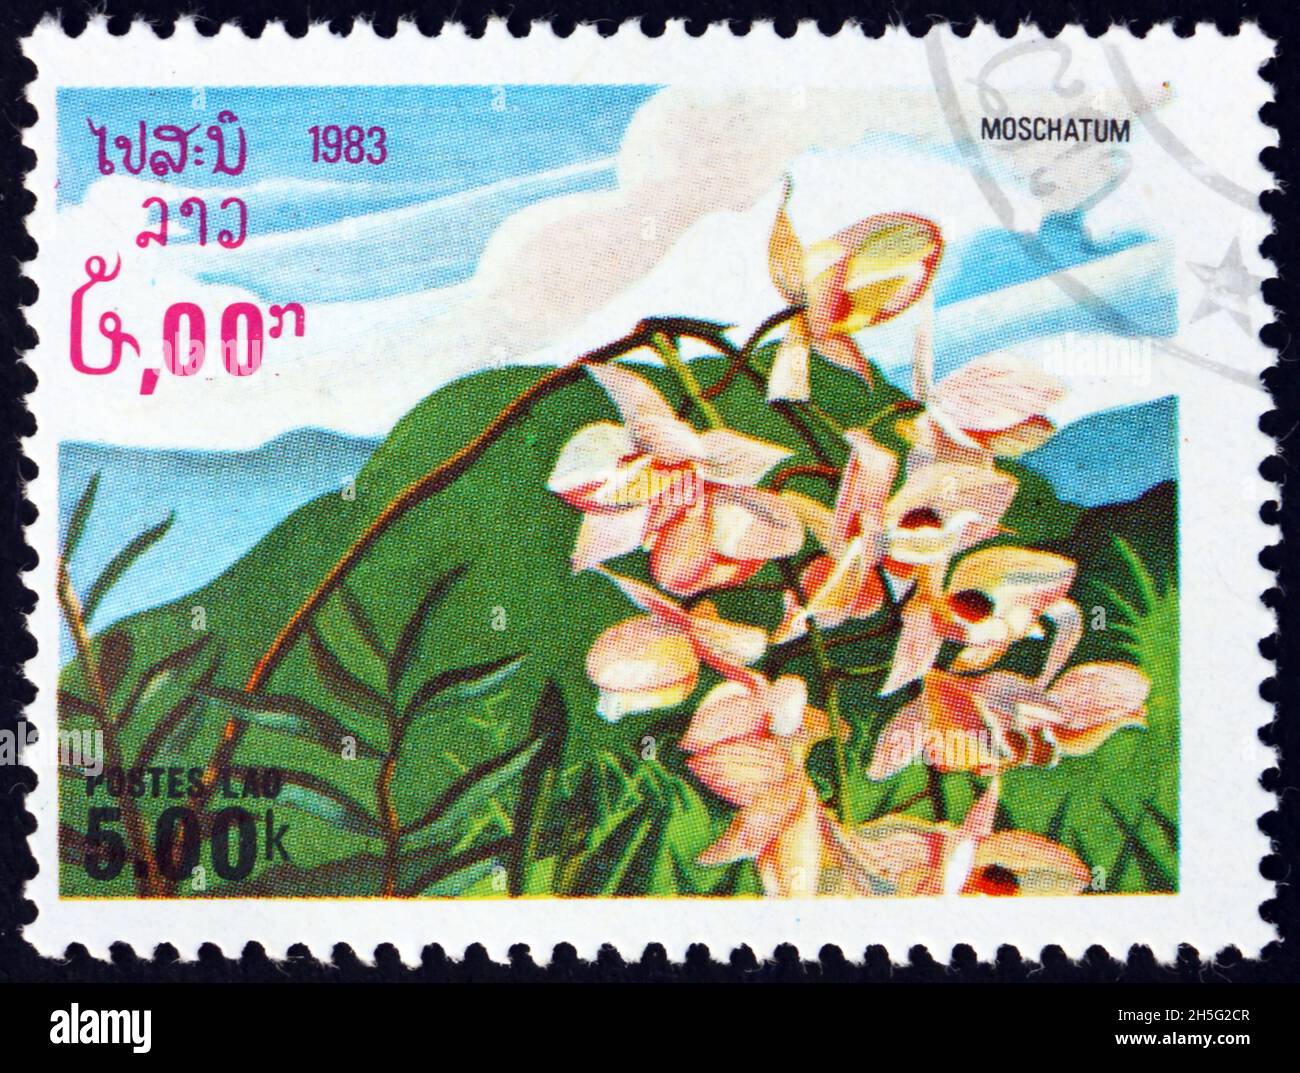 LAOS - CIRCA 1983: a stamp printed in Laos shows the musky-smelling dendrobium, dendrobium moschatum, is a species of orchid native to Himalayas, circ Stock Photo